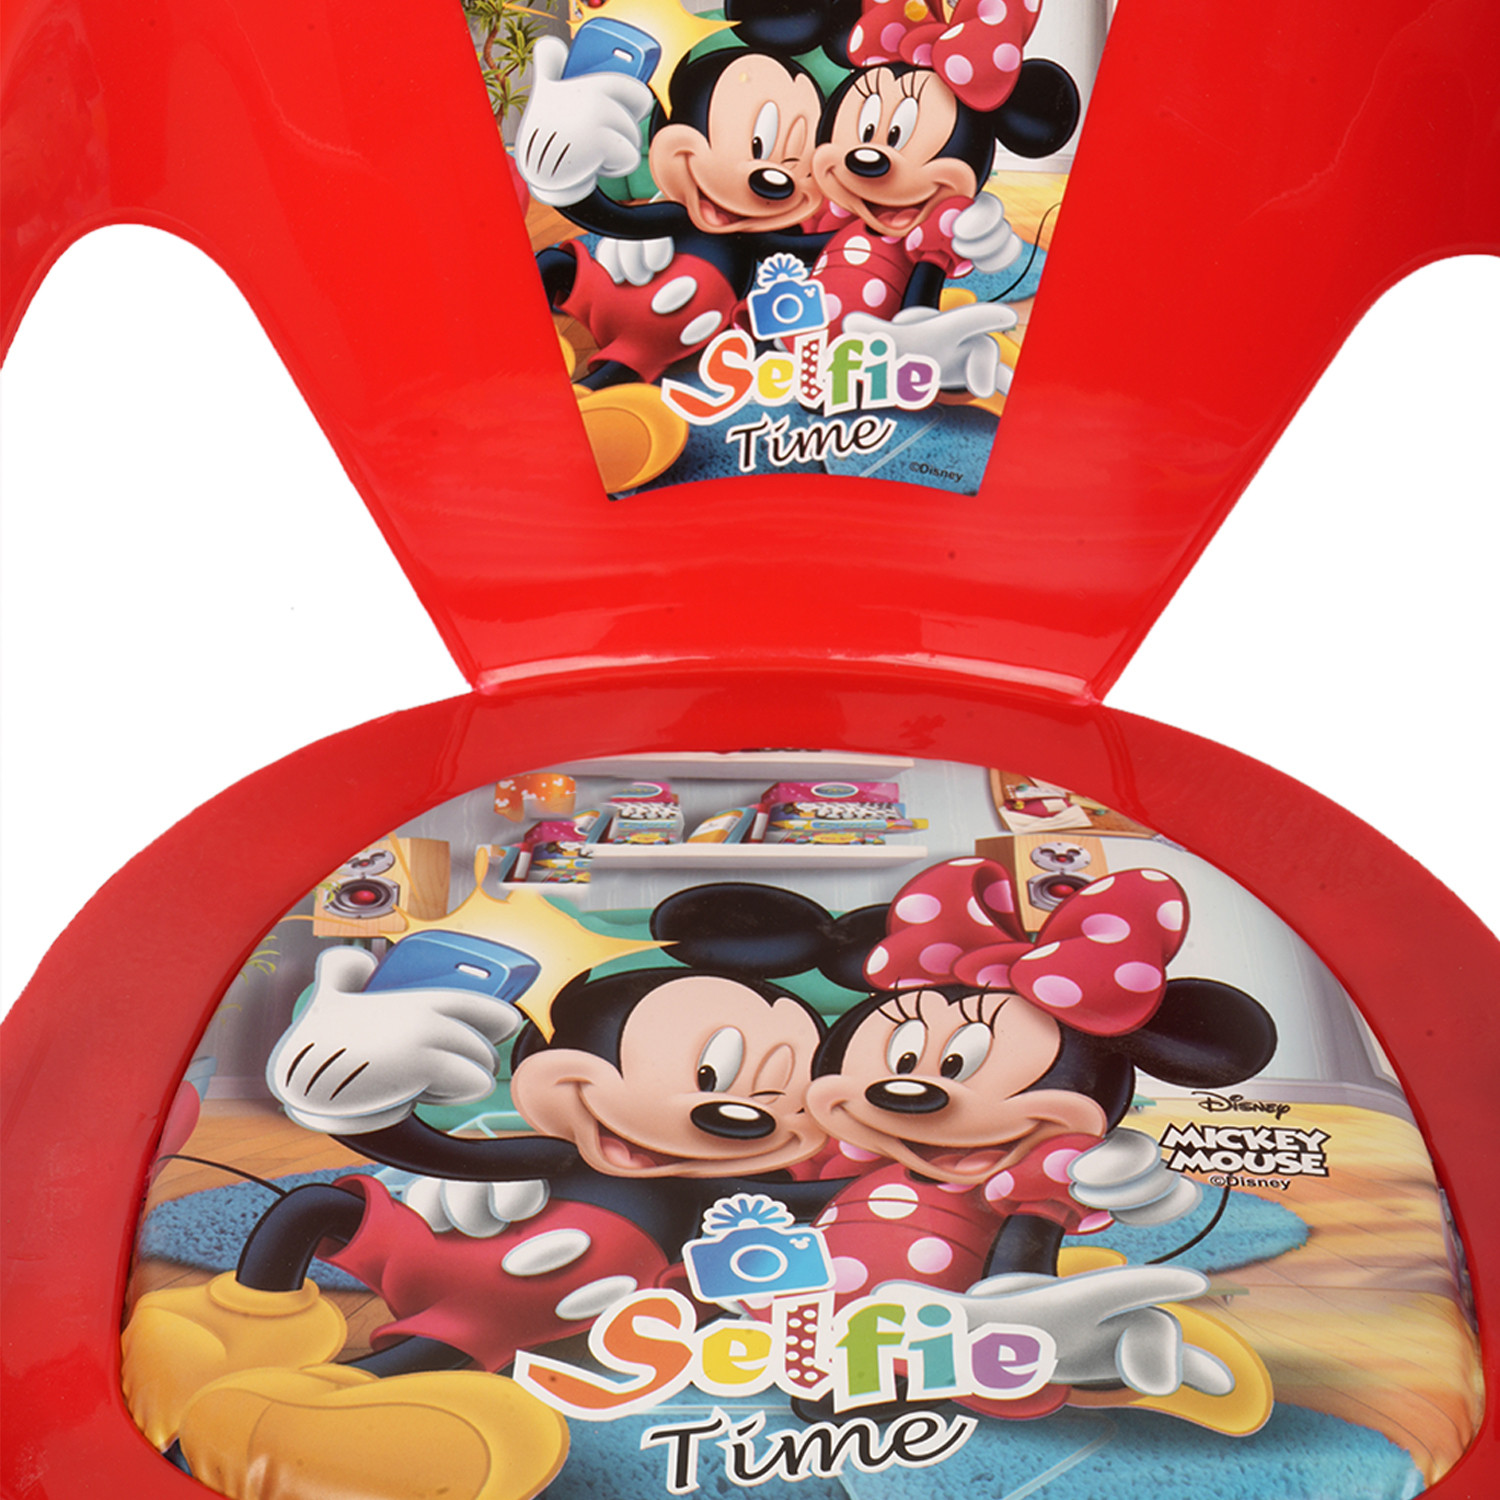 Kuber Industries Disney Mickey Kids Chair | Plastic Foldable Kids Chair | Chair for Kidsroom | School Study Stool | Baby Stool | Indoor or Outdoor Stool for Kids | Capacity 30 Kg | Red & Blue